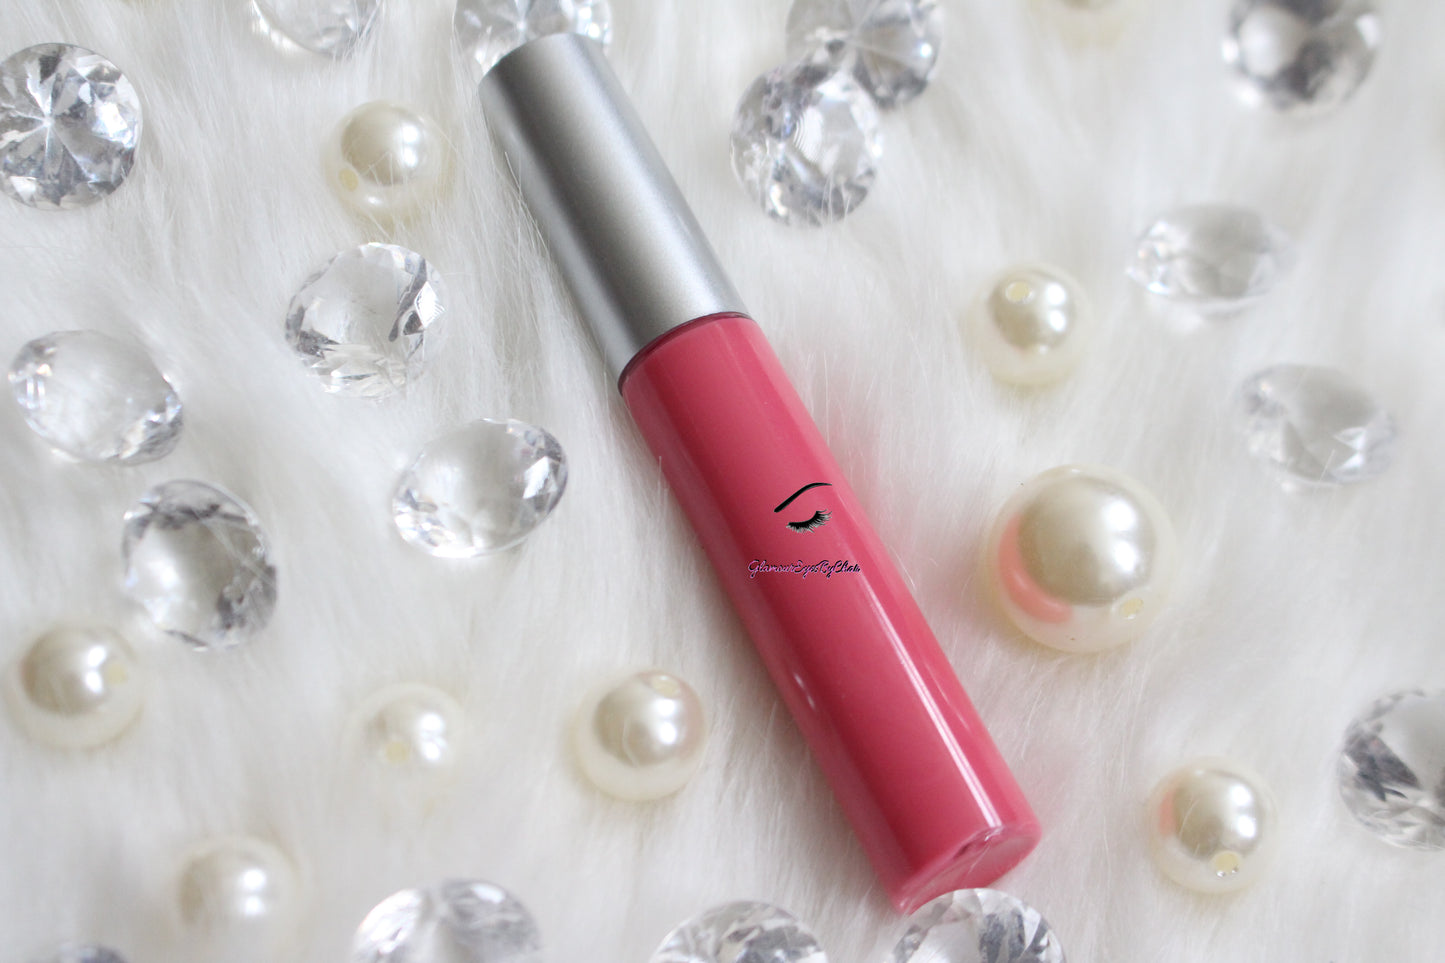 Strawberry Dream is a gorgeous pink hydrating gloss that smells just like her name. This gloss is also vegan, gluten-free, high shine, smooth and long lasting. It's made with premium rich ingredients to keep your lips soft, moisturized and luscious without feeling sticky. Strawberry Dream is available in a squeeze tube and a wand tube (doe foot applicator) for a more precise application.